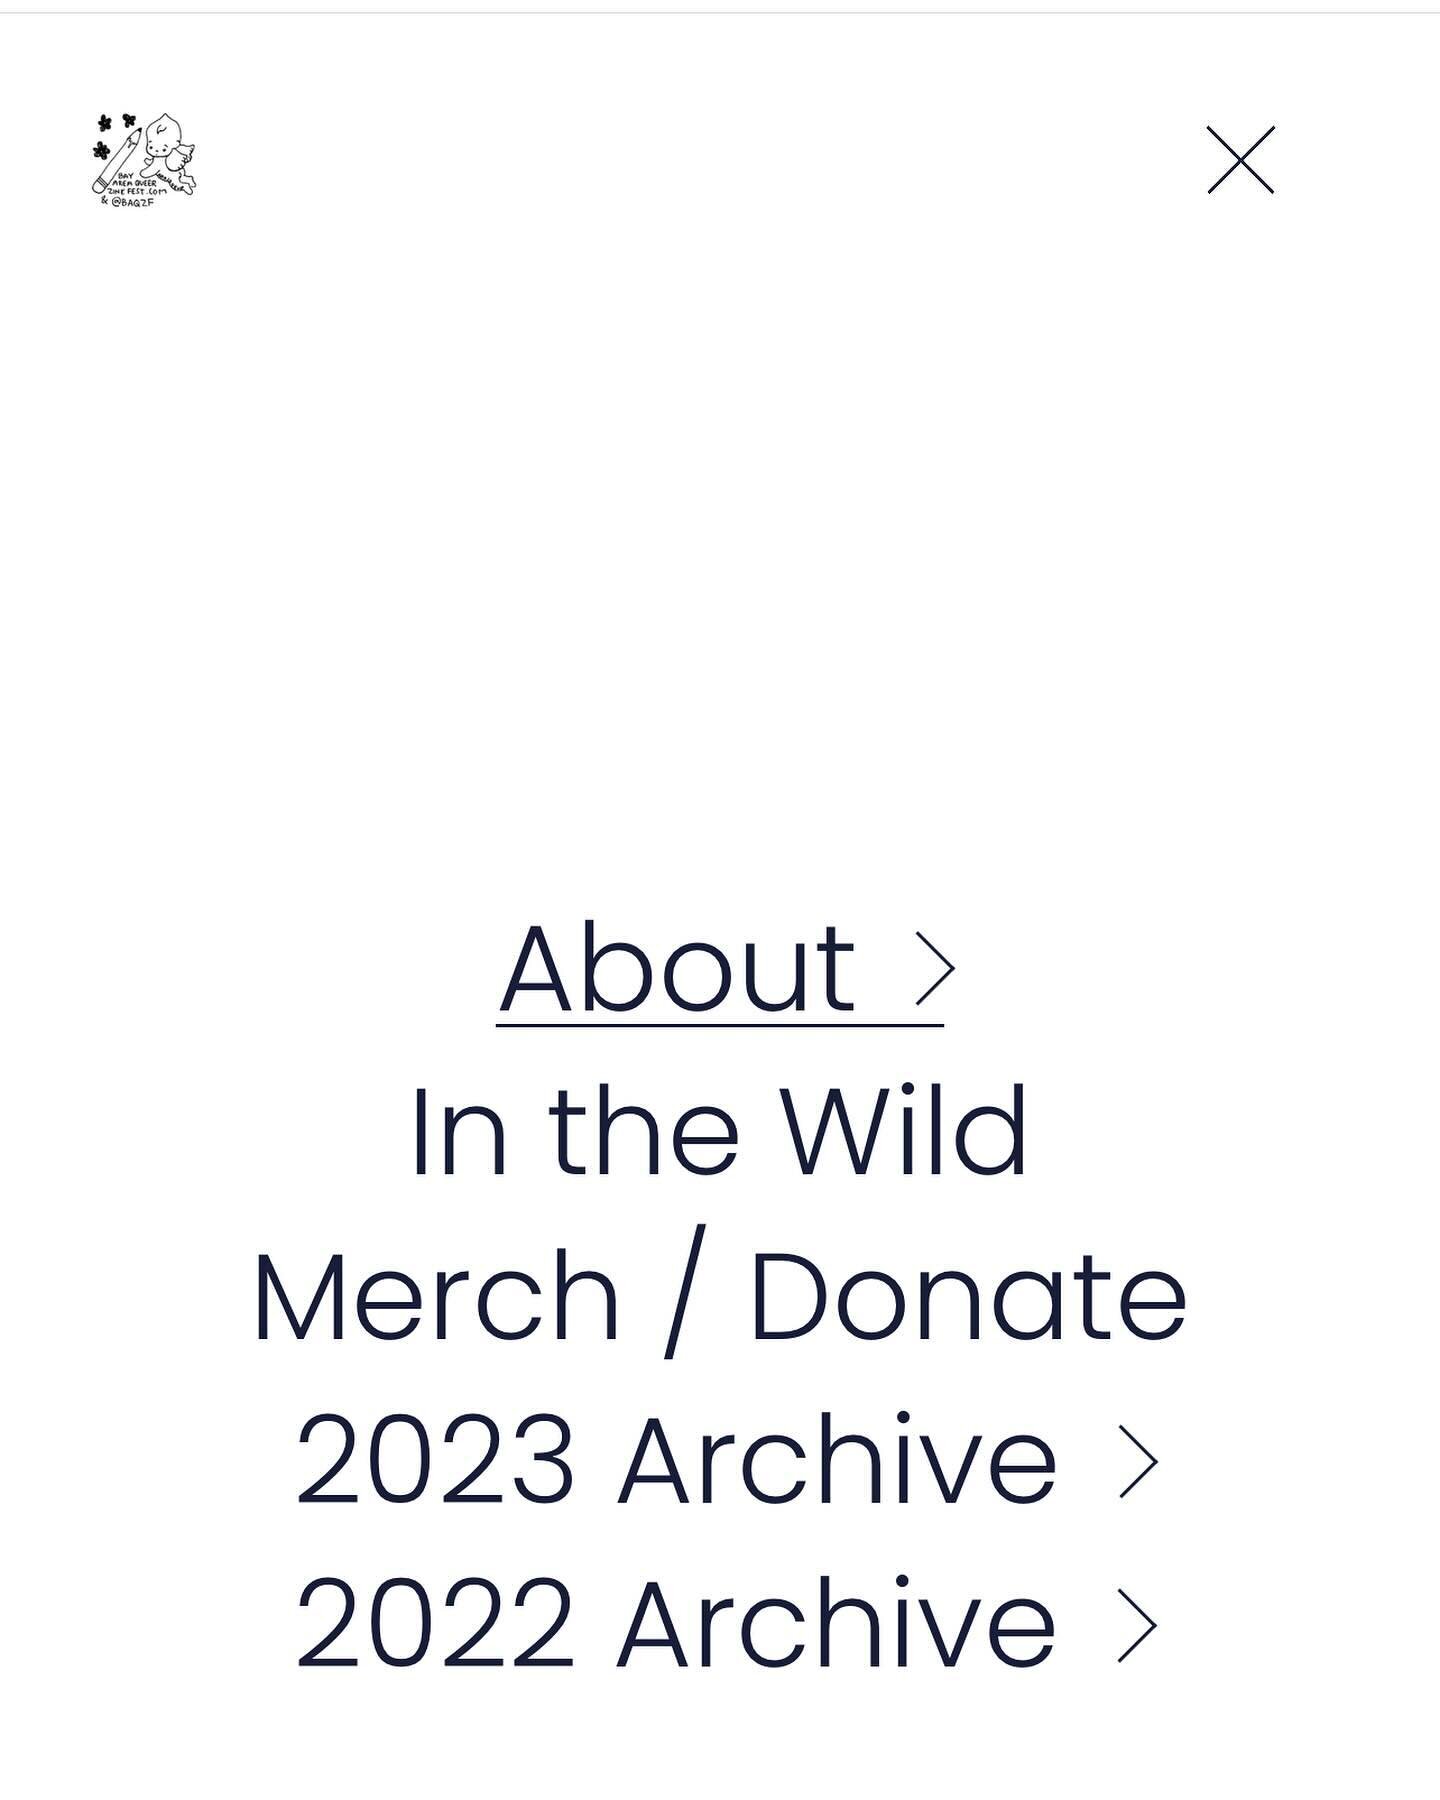 Archives for 2023 and 2022 are finally up on our website :) 

This year&rsquo;s organizers are meeting soon to discuss September&rsquo;s fest - if you have any feedback for us, please send us an email!! 💌